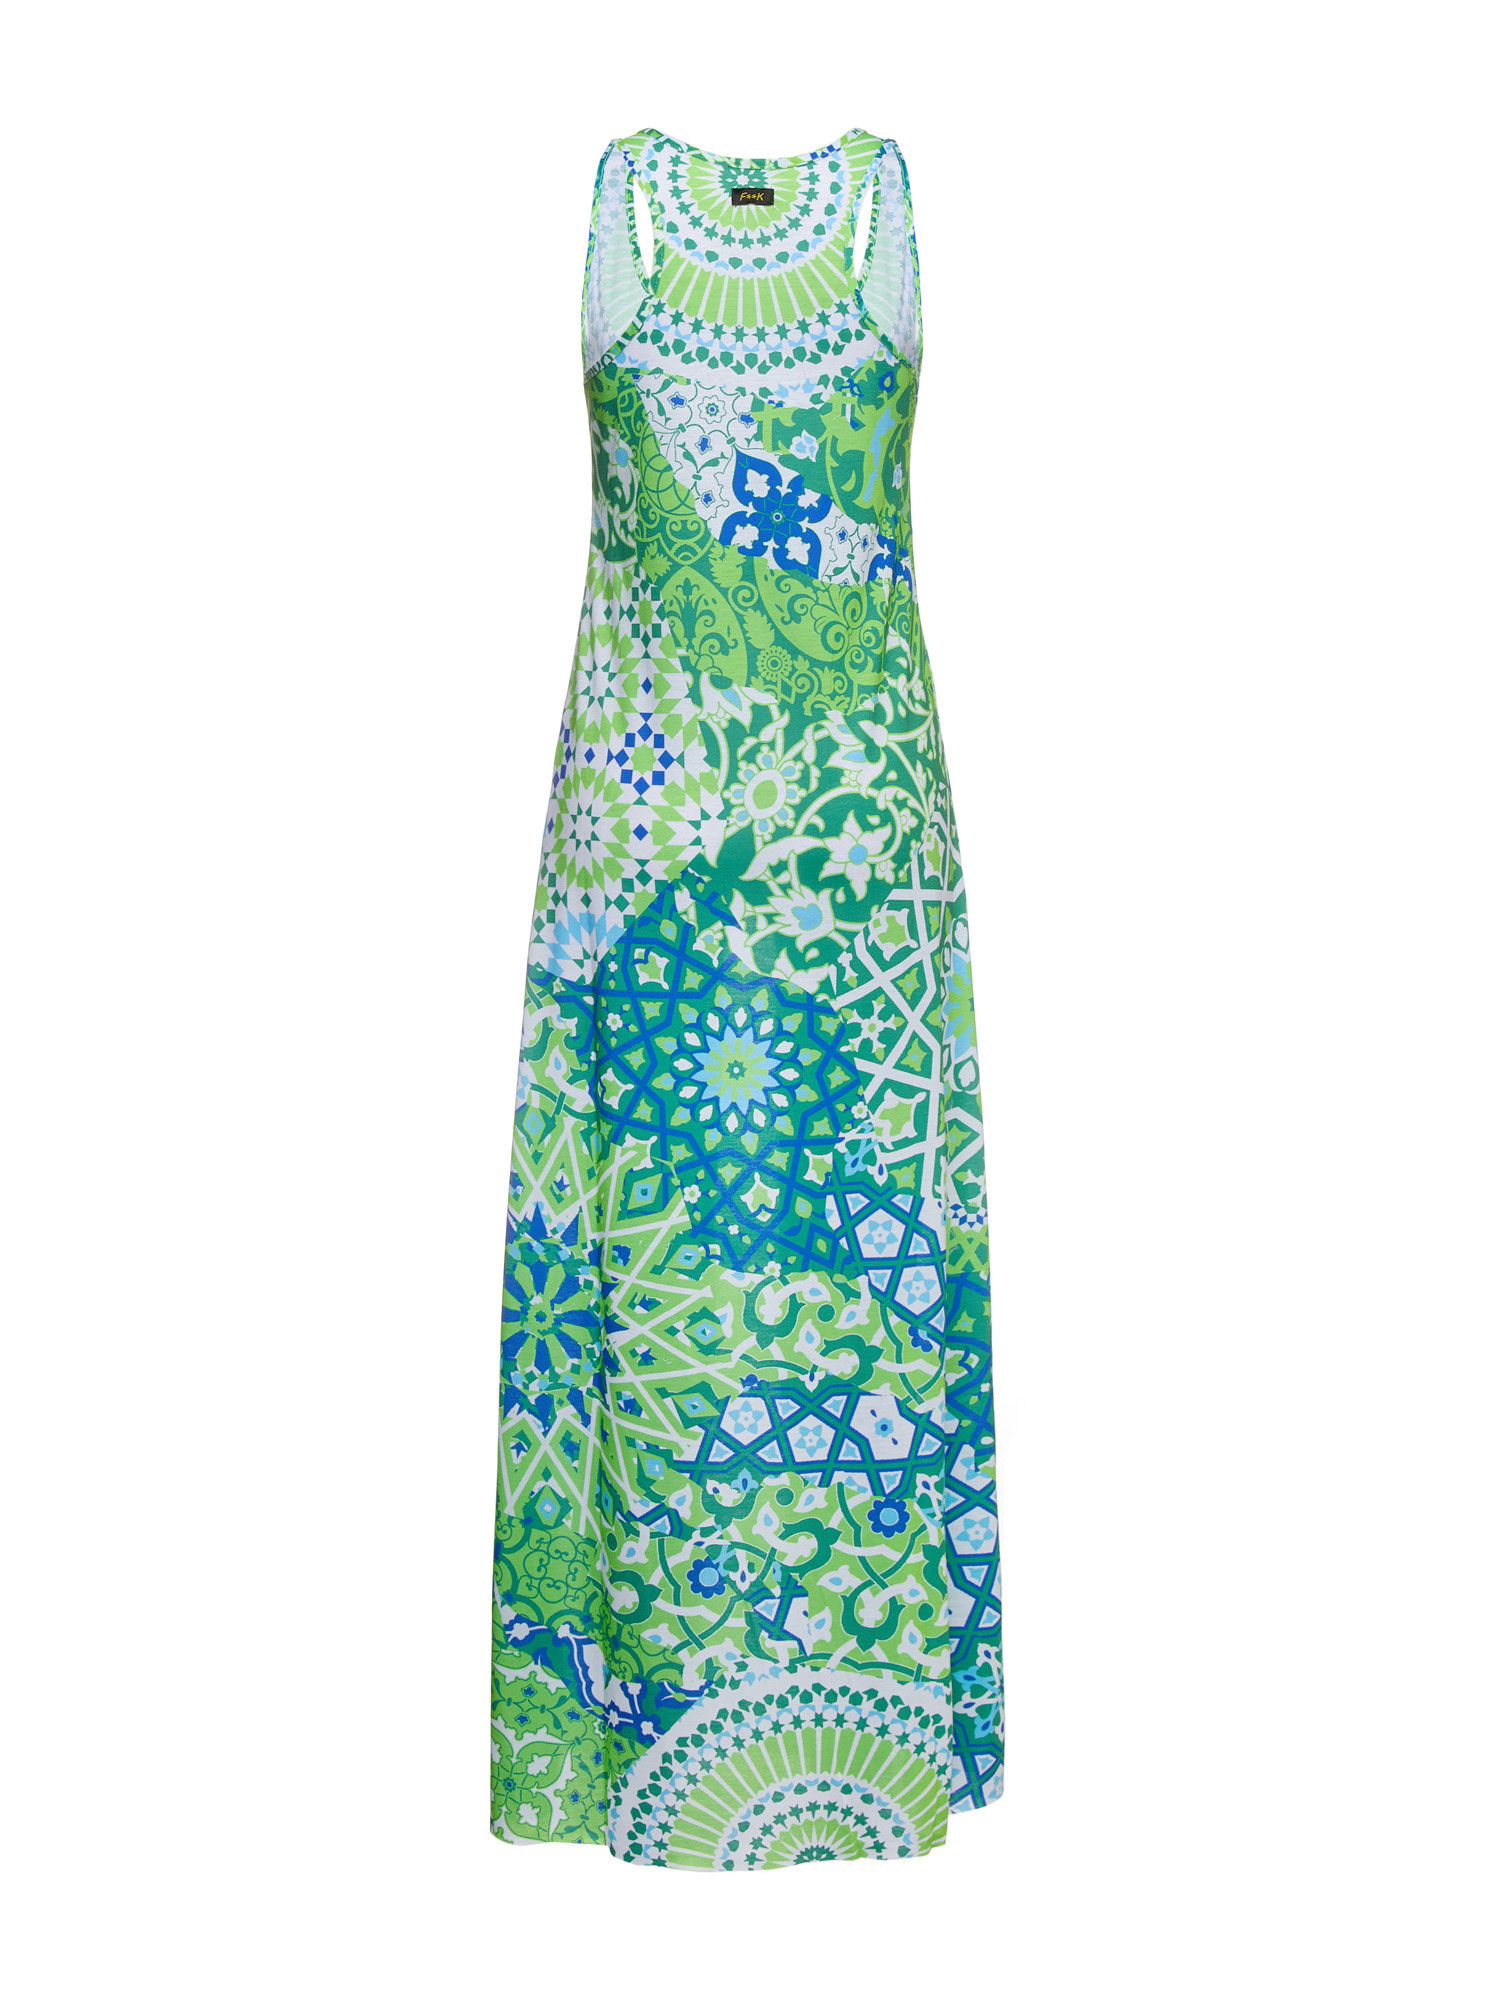 F**K - Long dress with print, Green, large image number 1